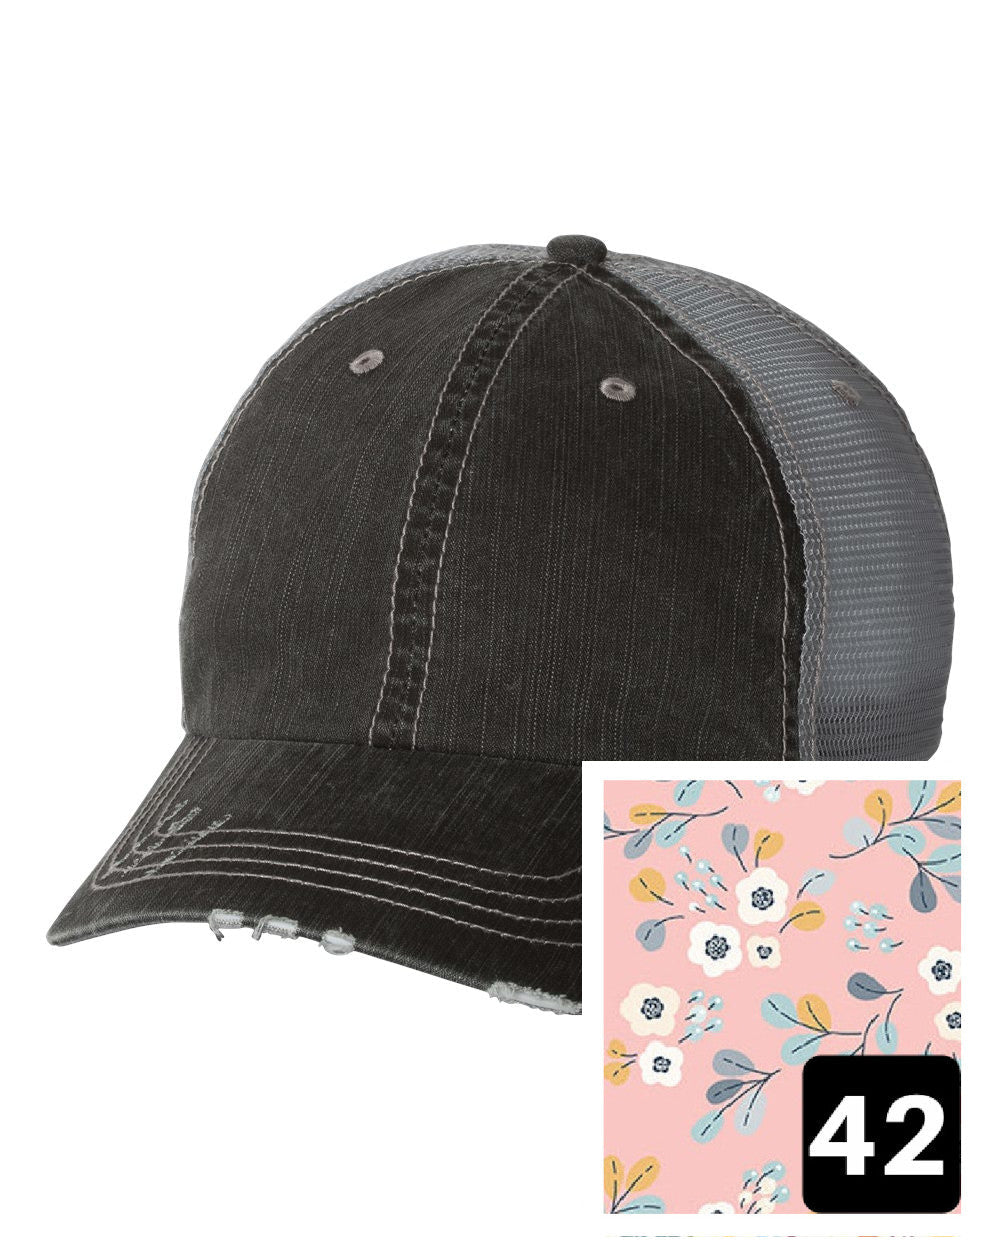 gray distressed trucker hat with light blue and pink mosaic fabric state of Massachusetts